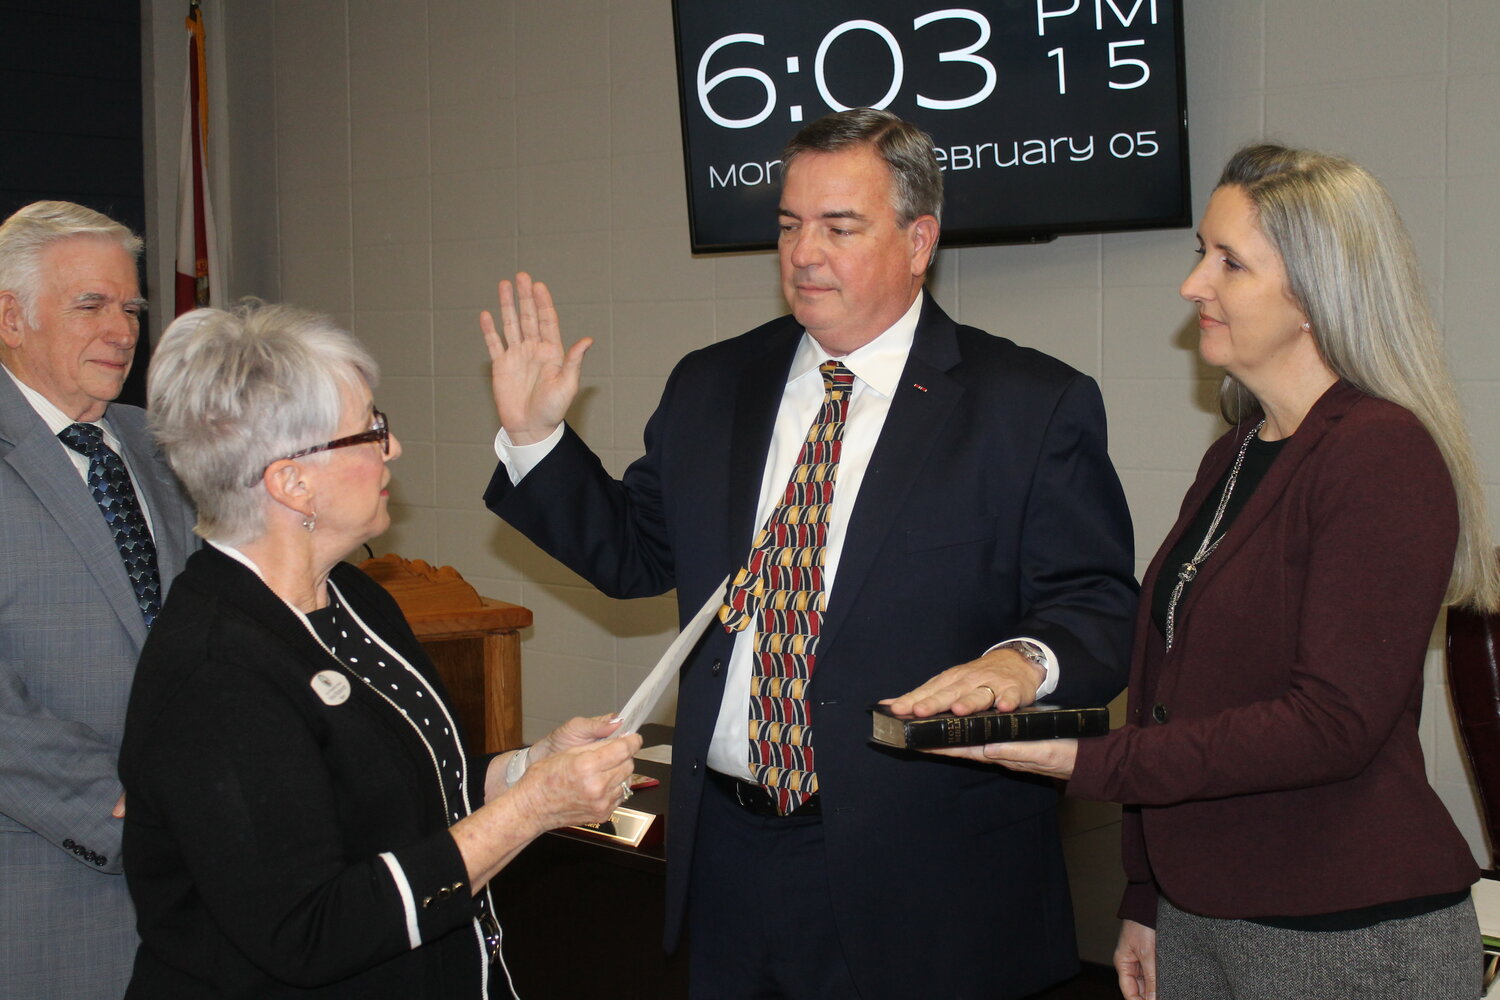 City Manager Charlie Van Zant Jr. is sworn in with his family present. One of his first duties is to finalize the purchase and acquisition of a plot of land on the intersection of SR 100 and SR 21.